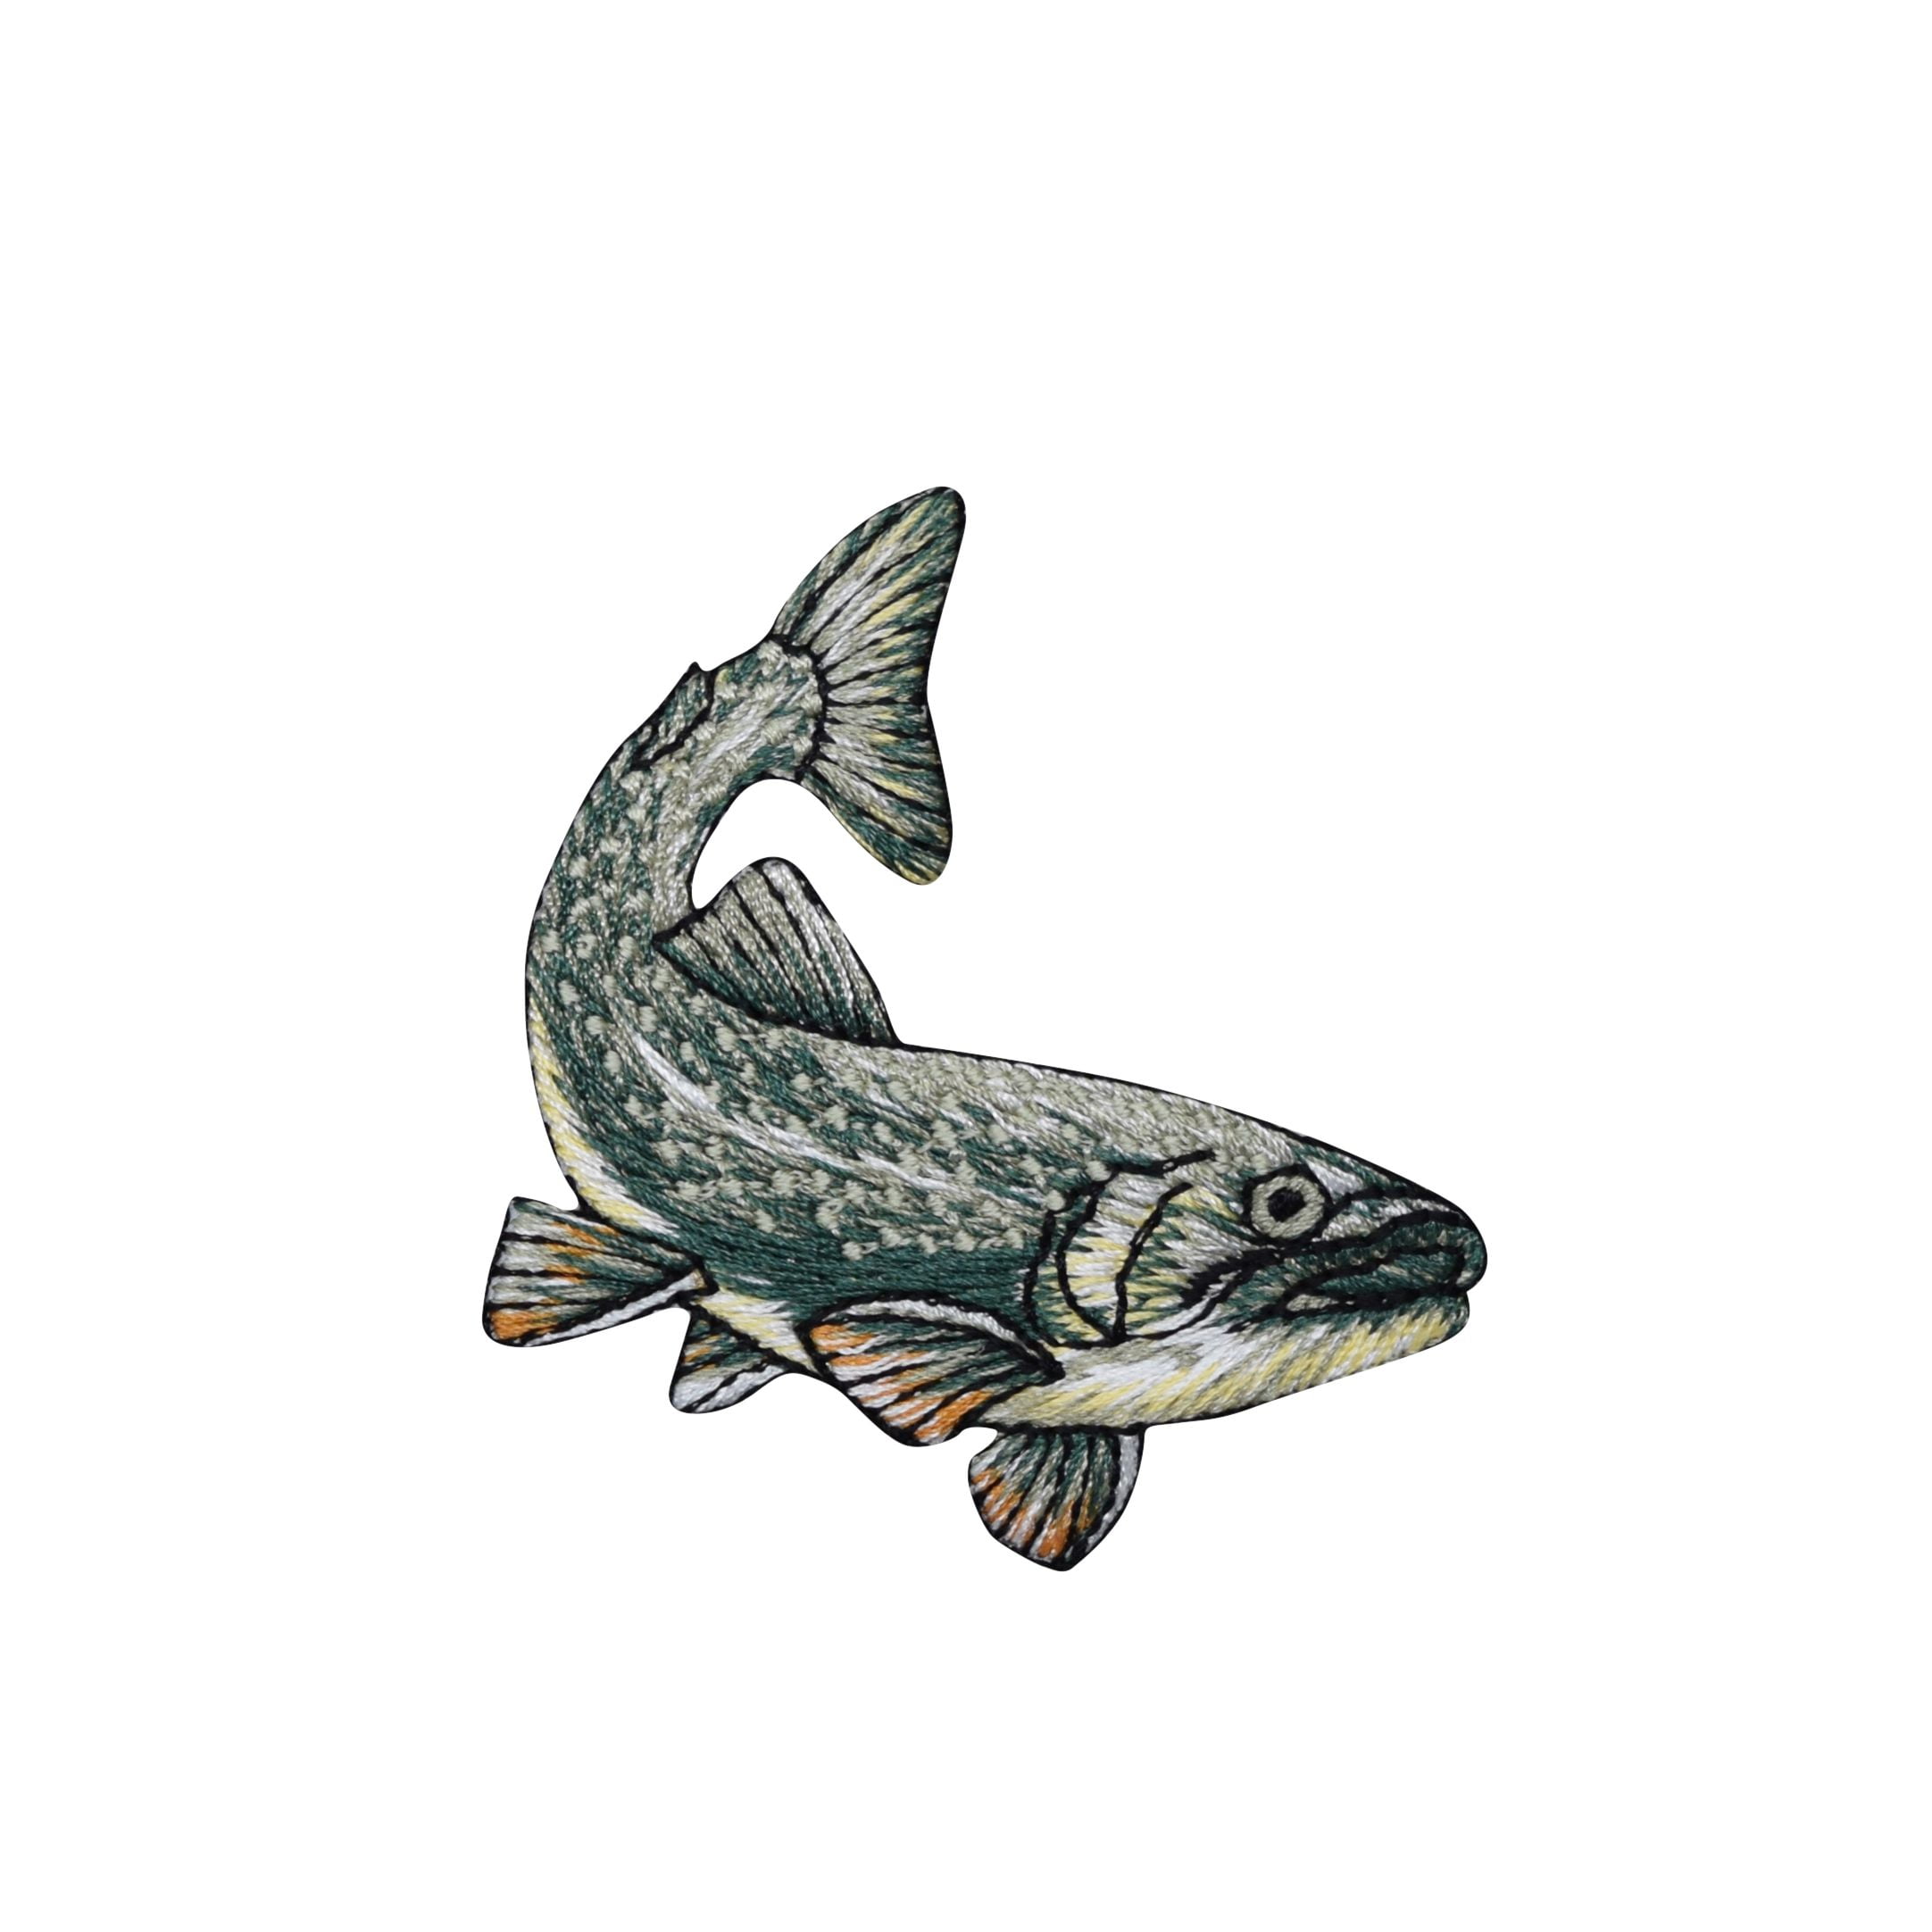 Iron on Applique Embroidered Patch 693680-B BlueGreen Stripe Bass Natural Fish Facing Right